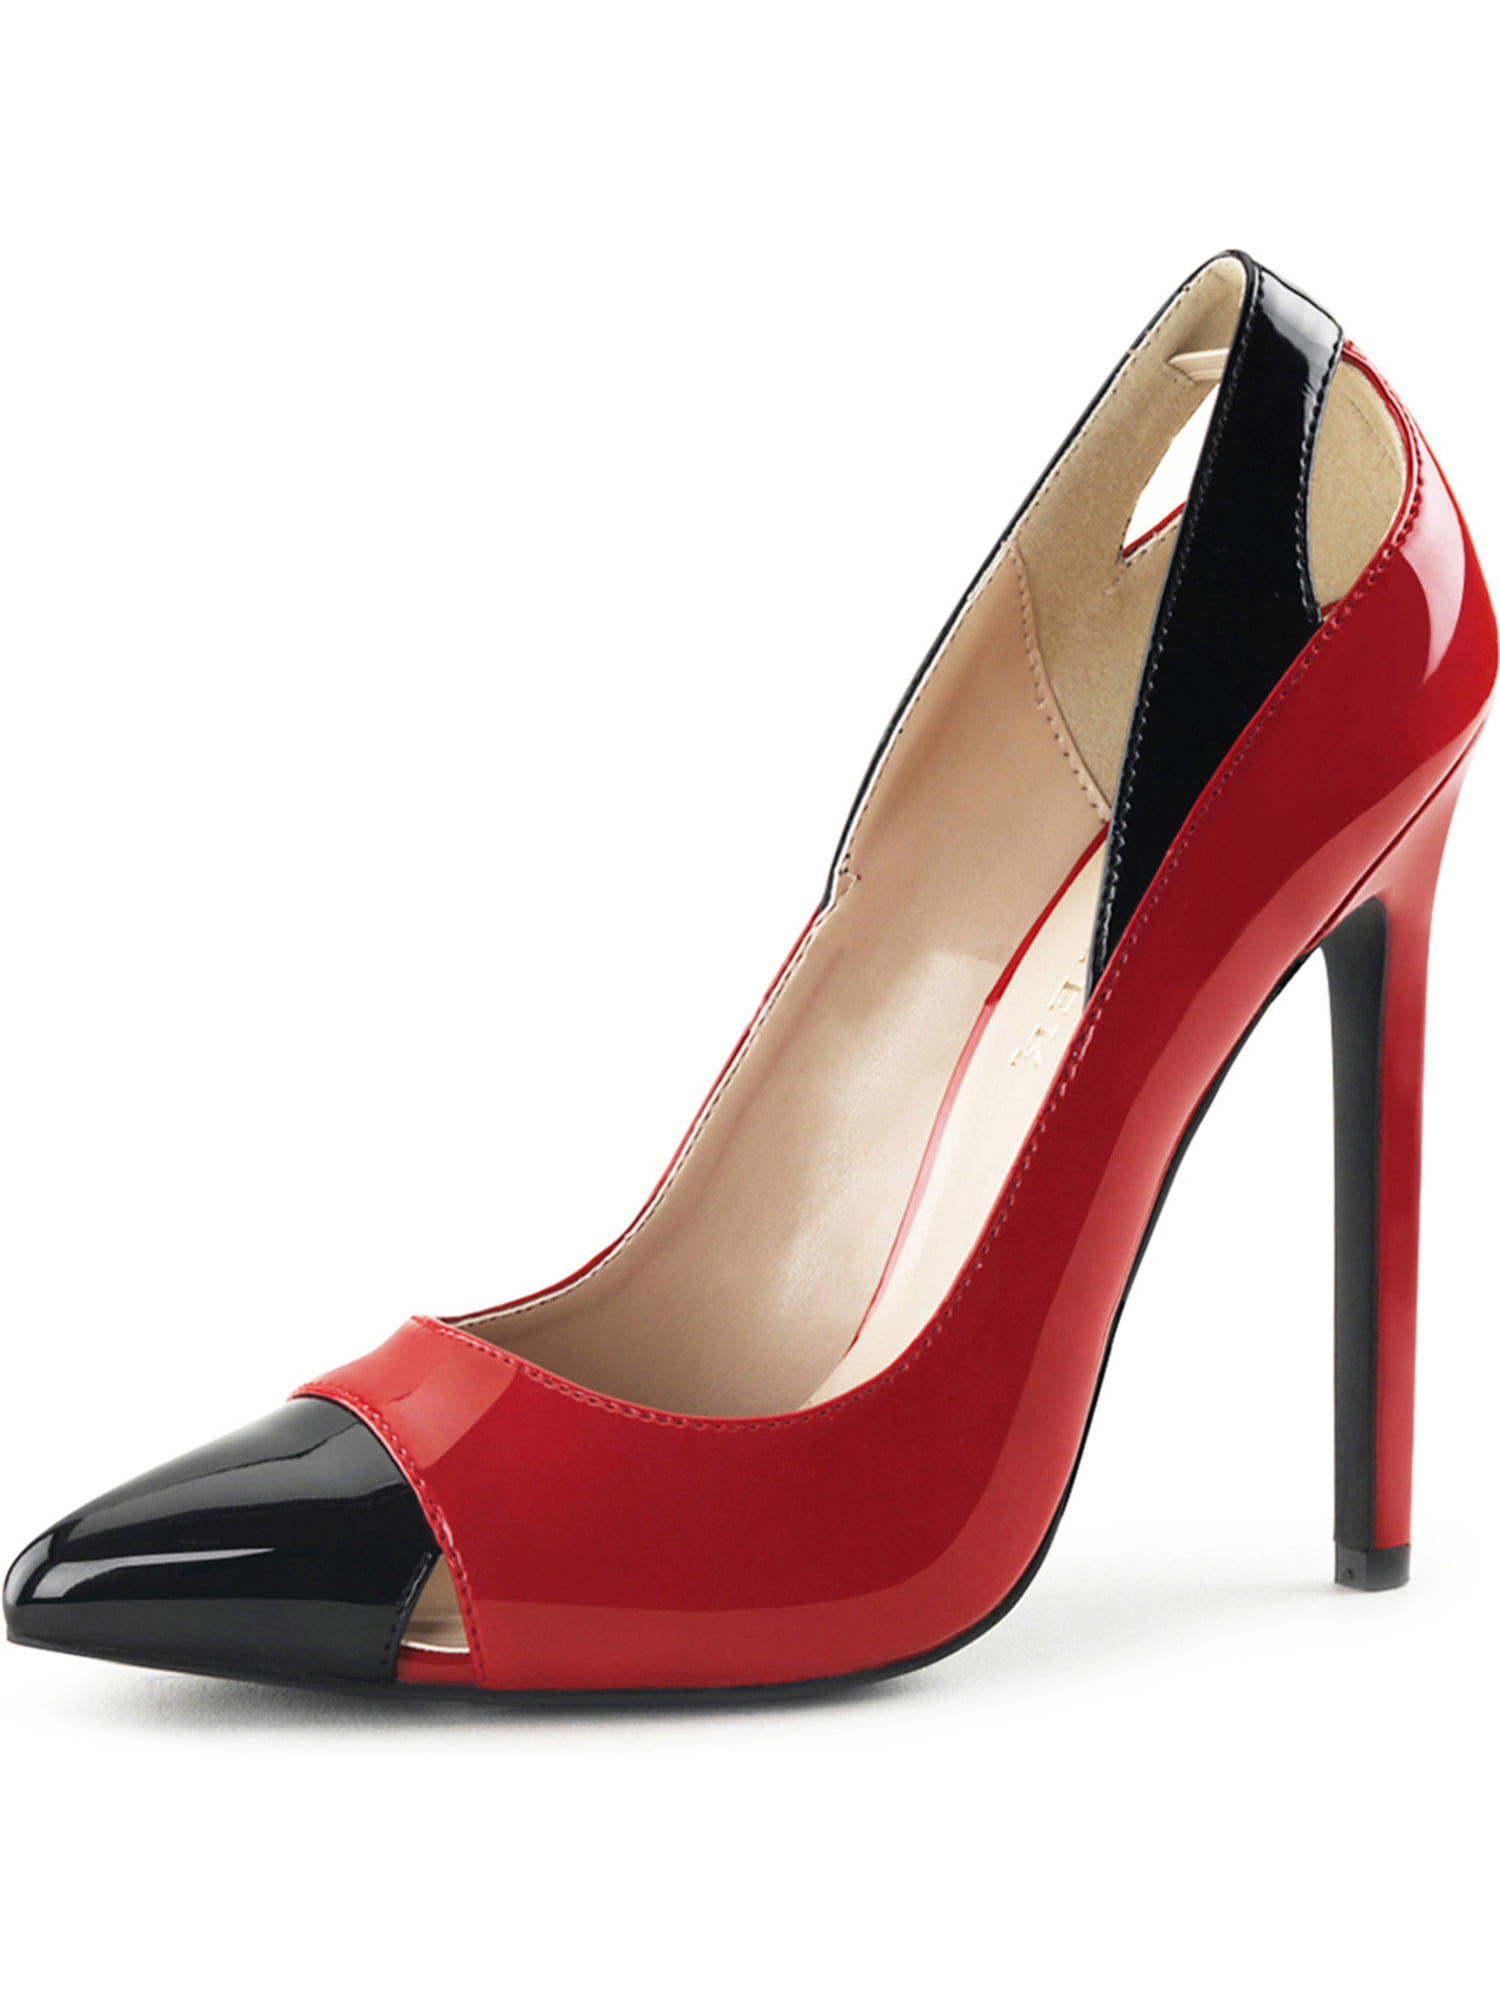 Womens Red and Black Shoes Spectator 